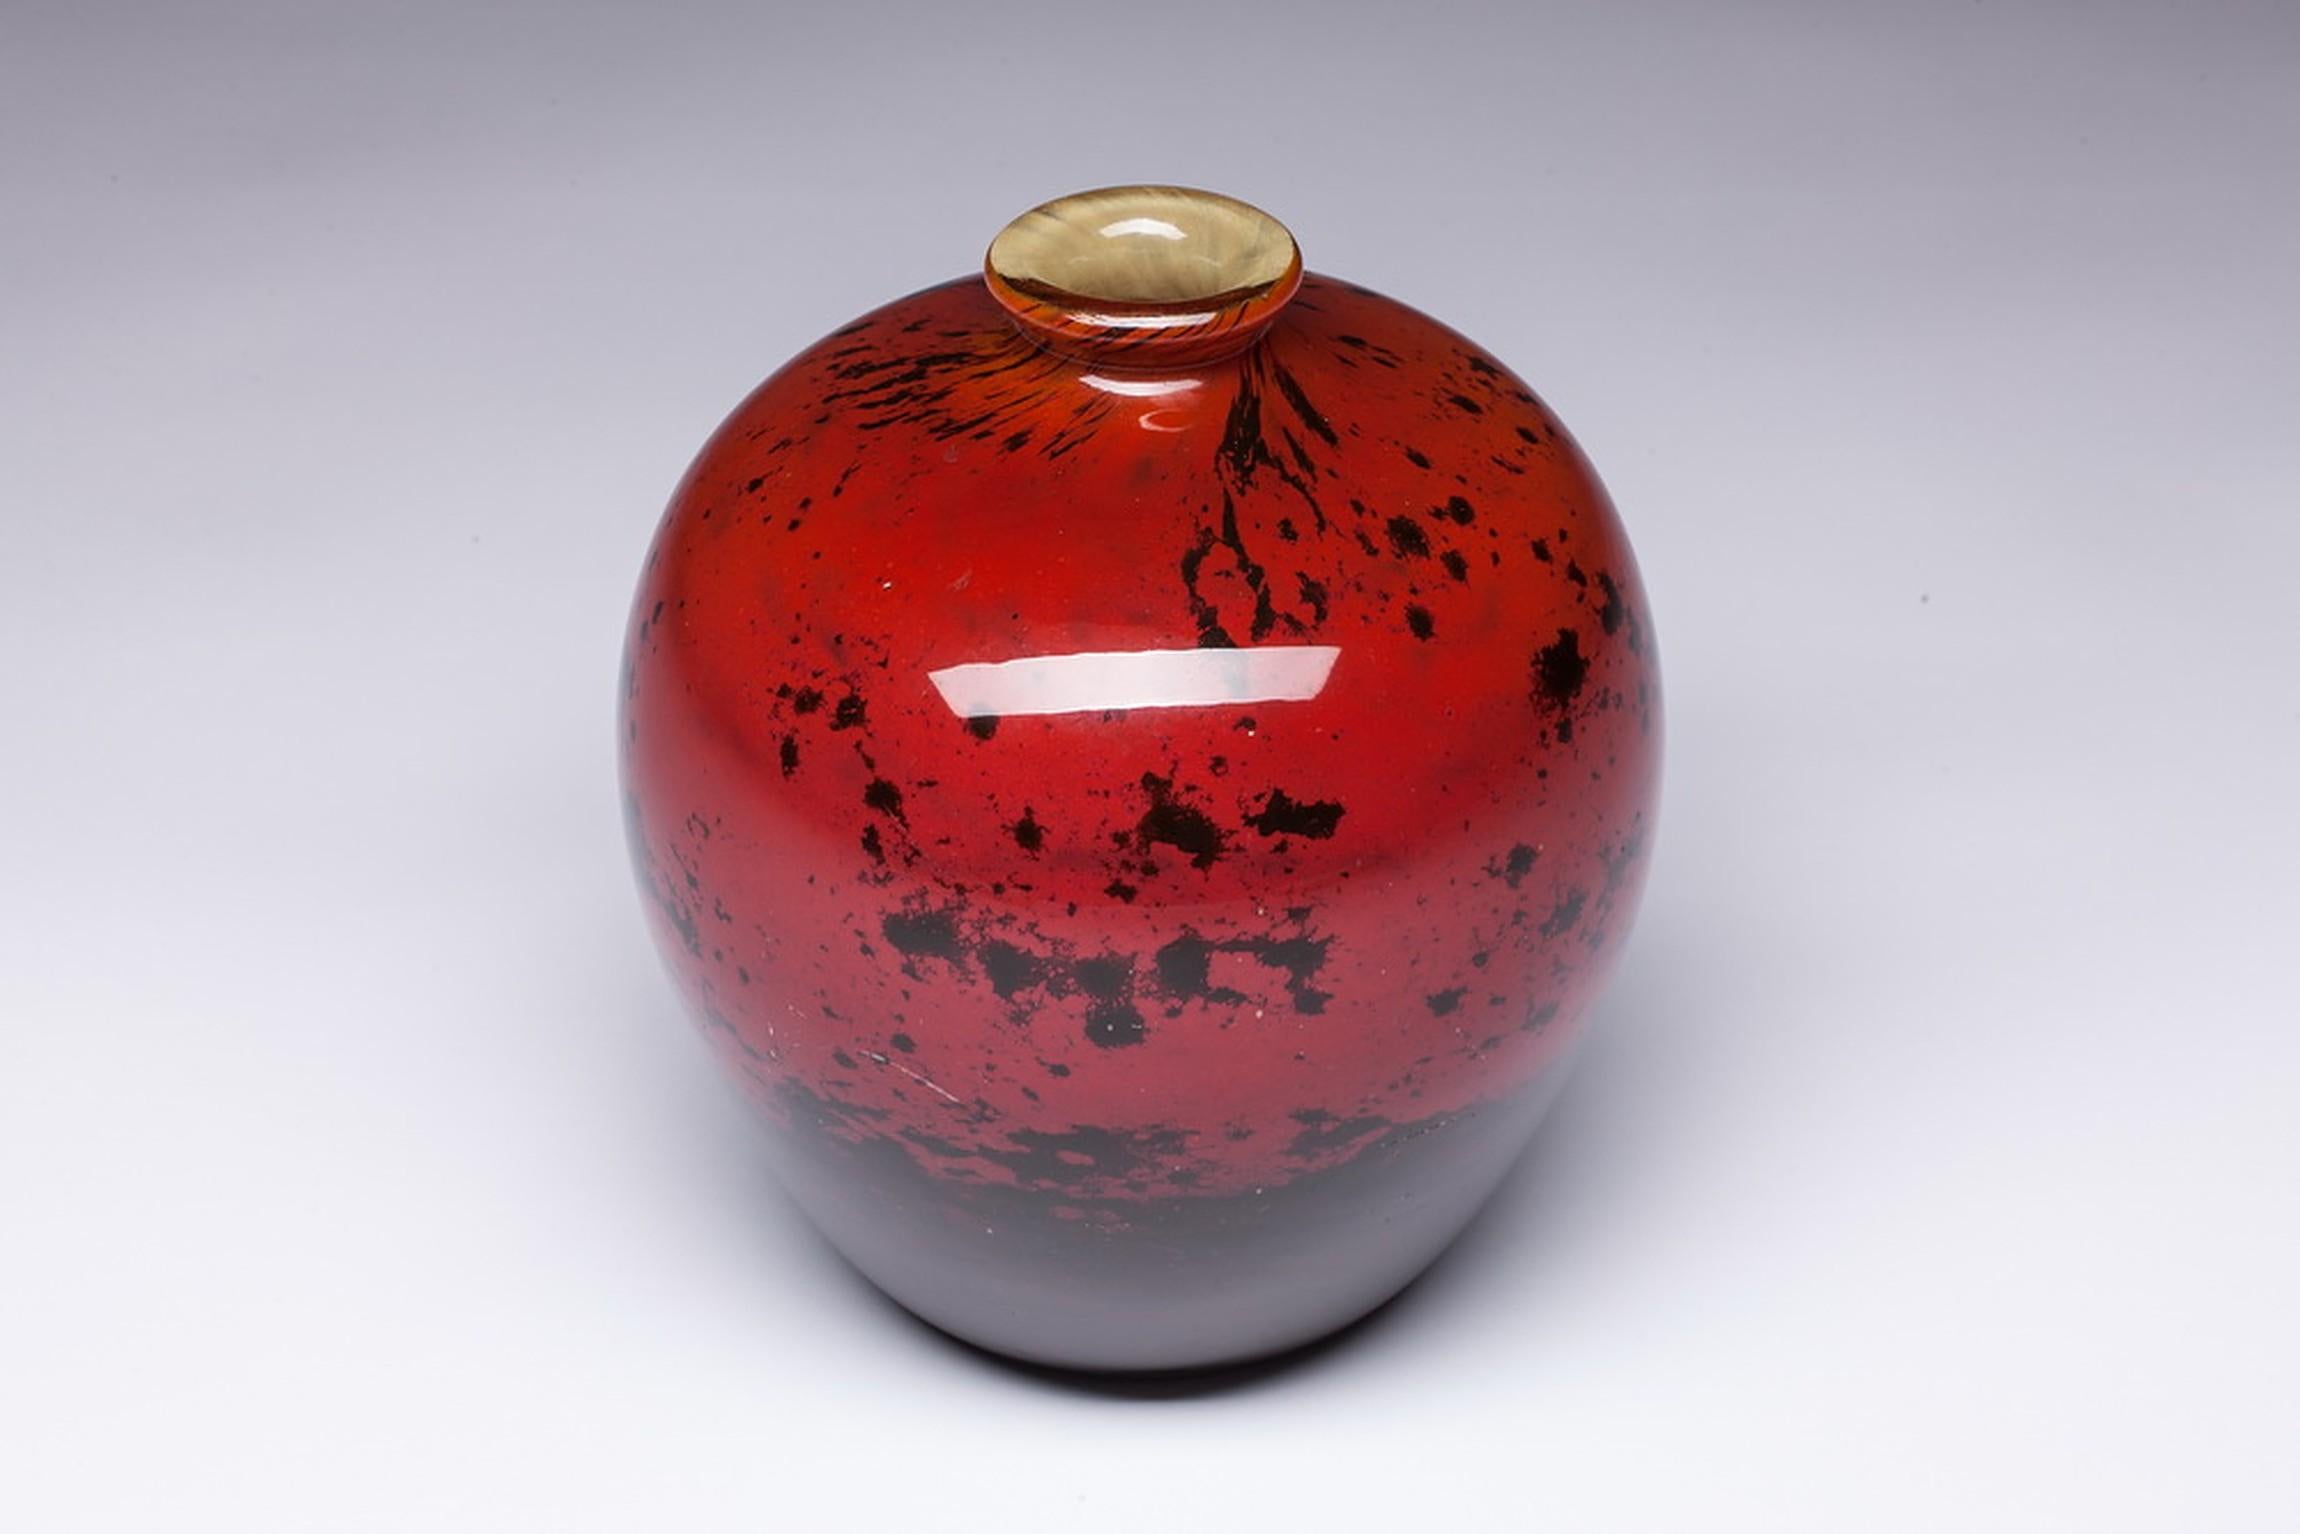 Daum Nancy Art Deco Decorative Vase. Daum vase ovoid shape with tight neck in blown glass with red and black color background. The signature is at the bottom of the vase. The signature is engraved.

notary Jean Daum in 1878: He acquired a local